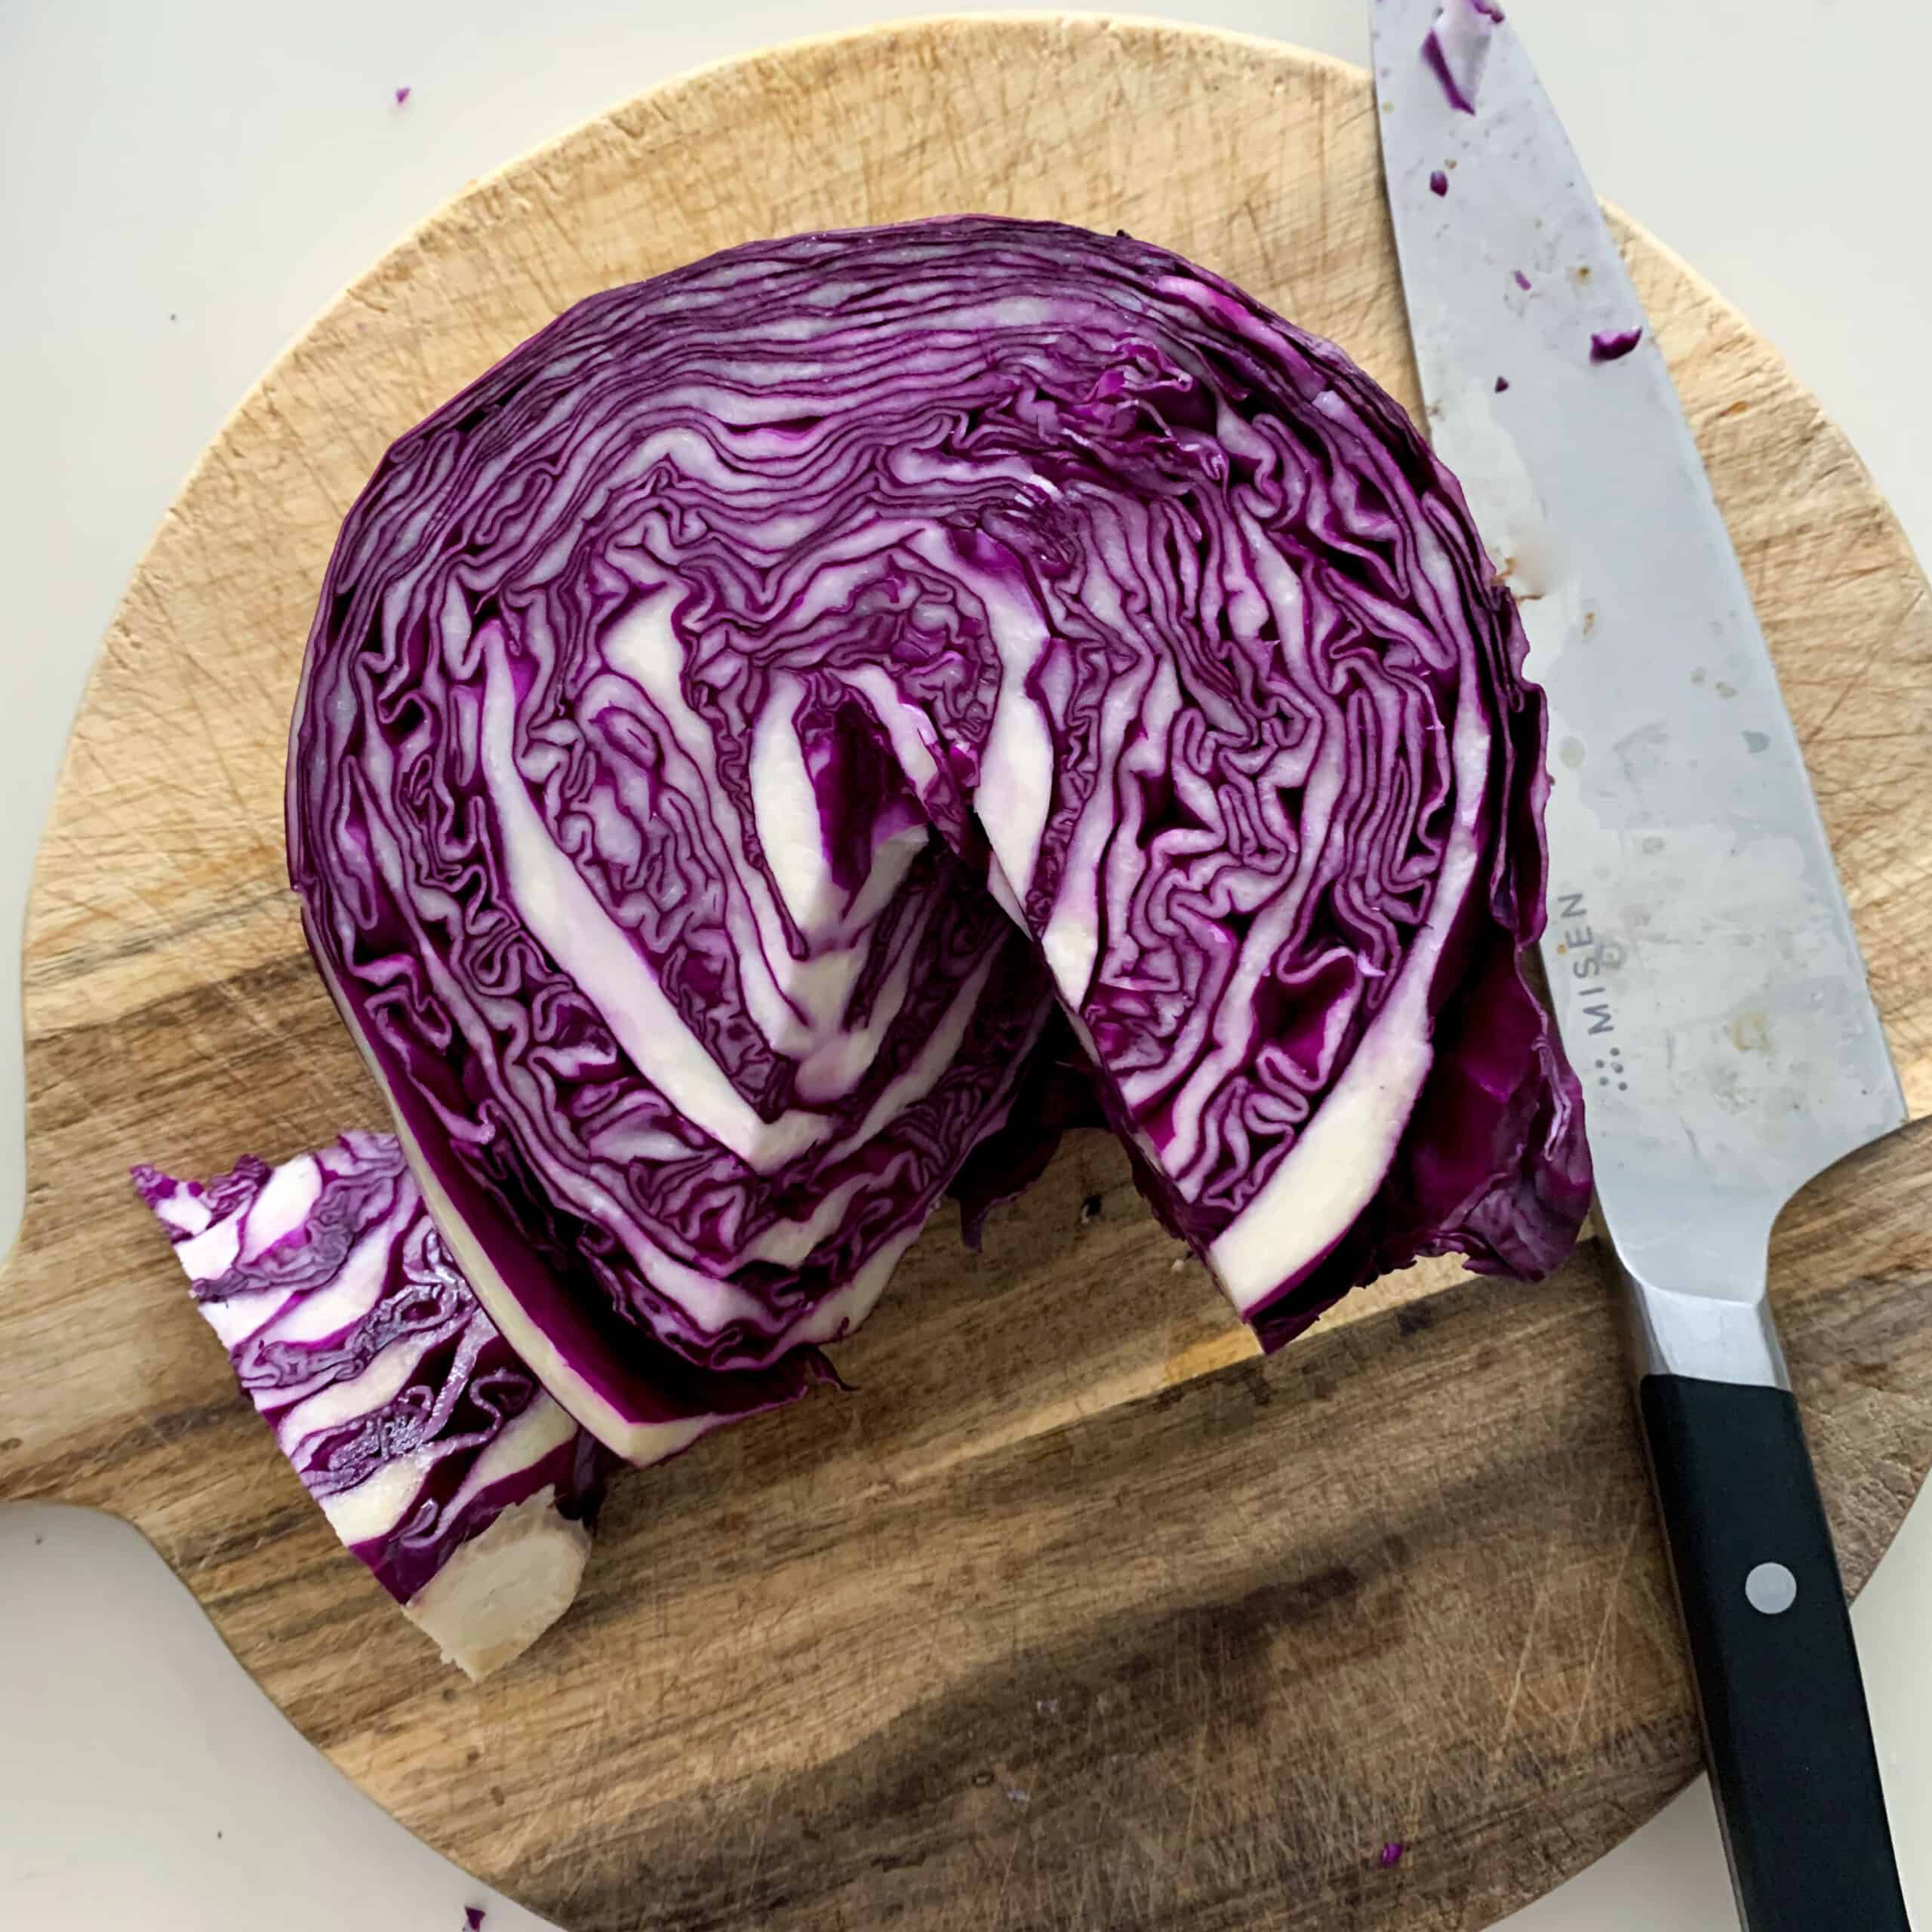 cored red cabbage on wooden board